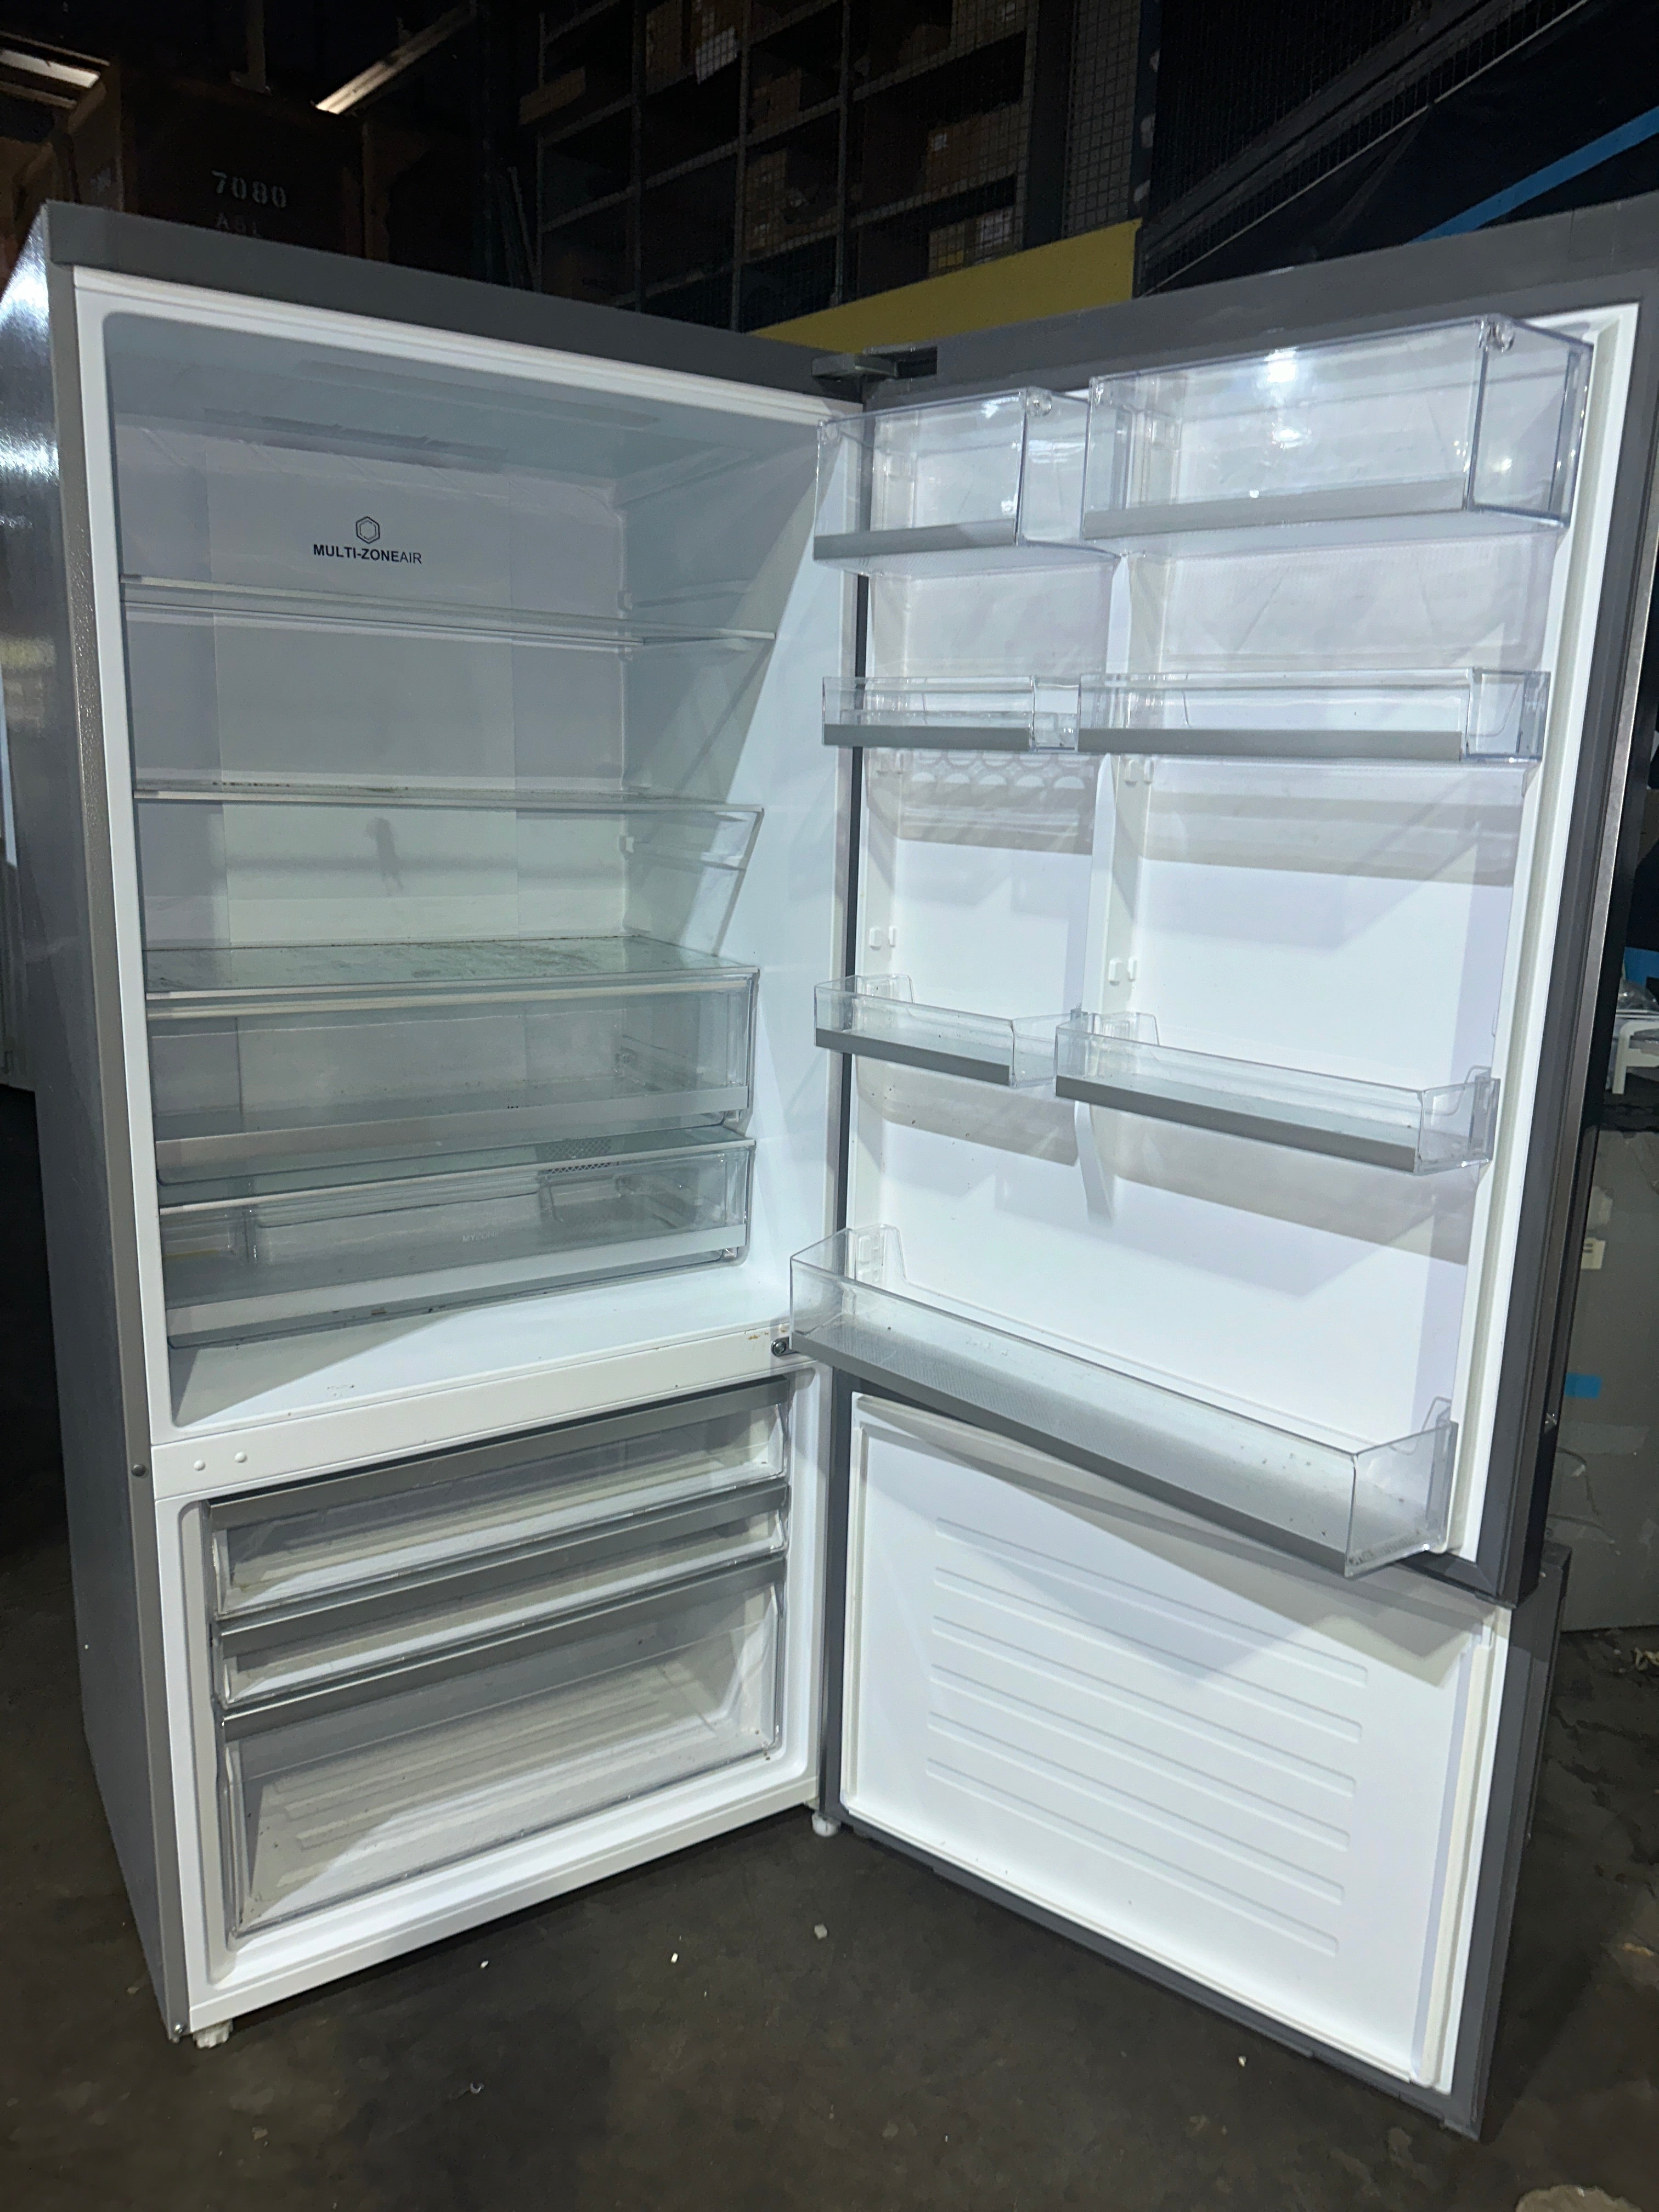 Haier HRF520BS Stainless 493 L Bottom Mount  Refrigerator - Sydney Appliances Outlet